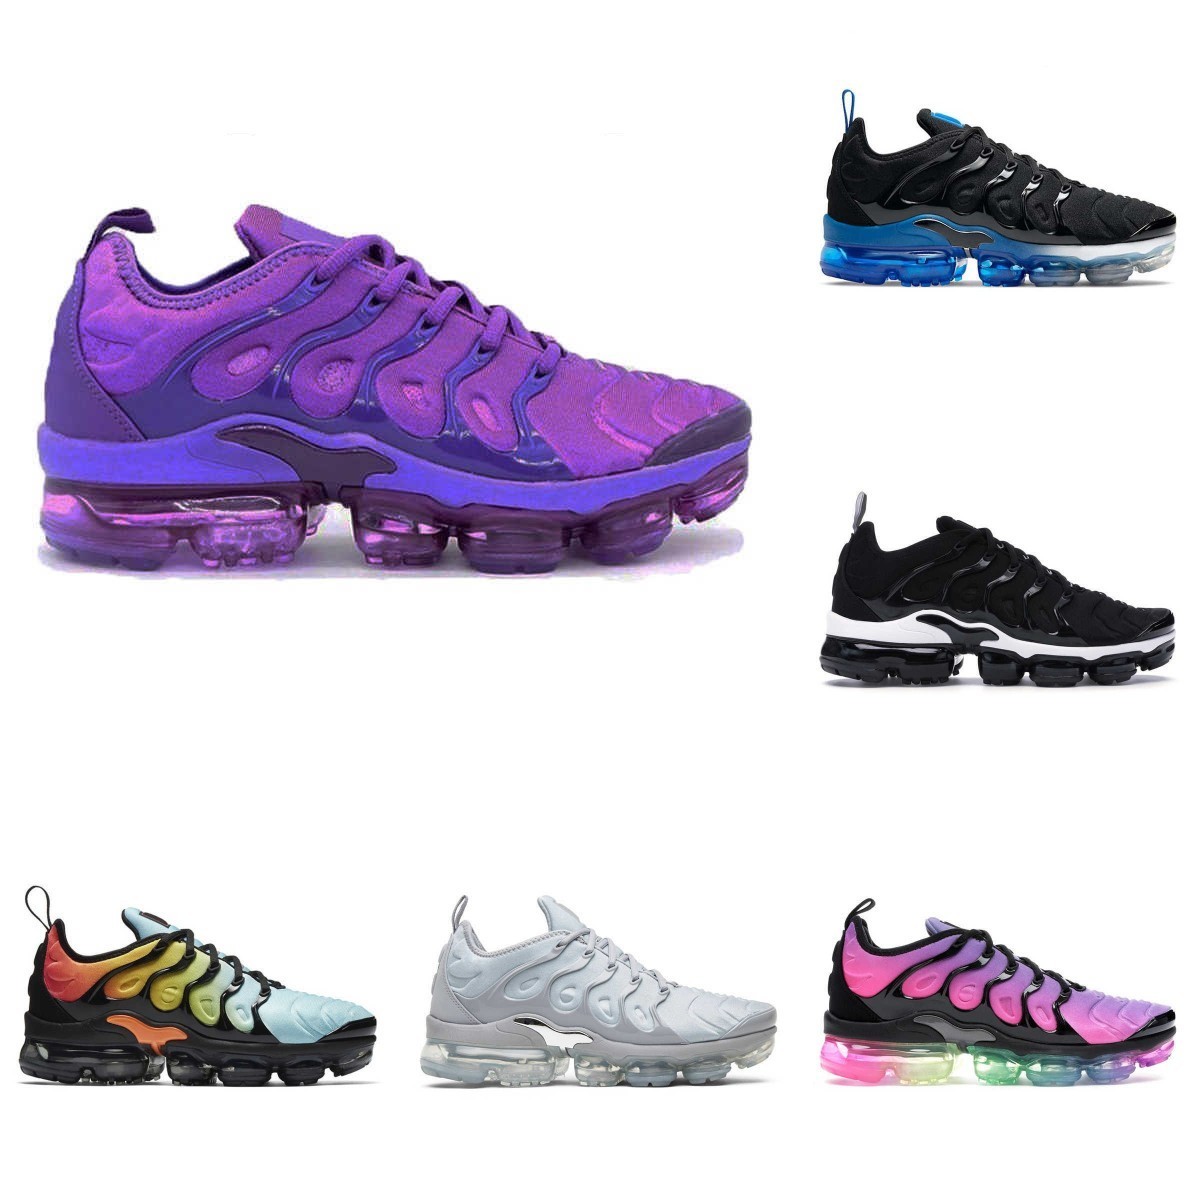 

2022 Griffey Tn Plus Men Women Casual Shoes Vapores Triple Trainer Airs Cushion Black Red Blue Royal Volt Fireberry Berry Psychic Pink Designer Sports Sneakers Y97, Please contact us